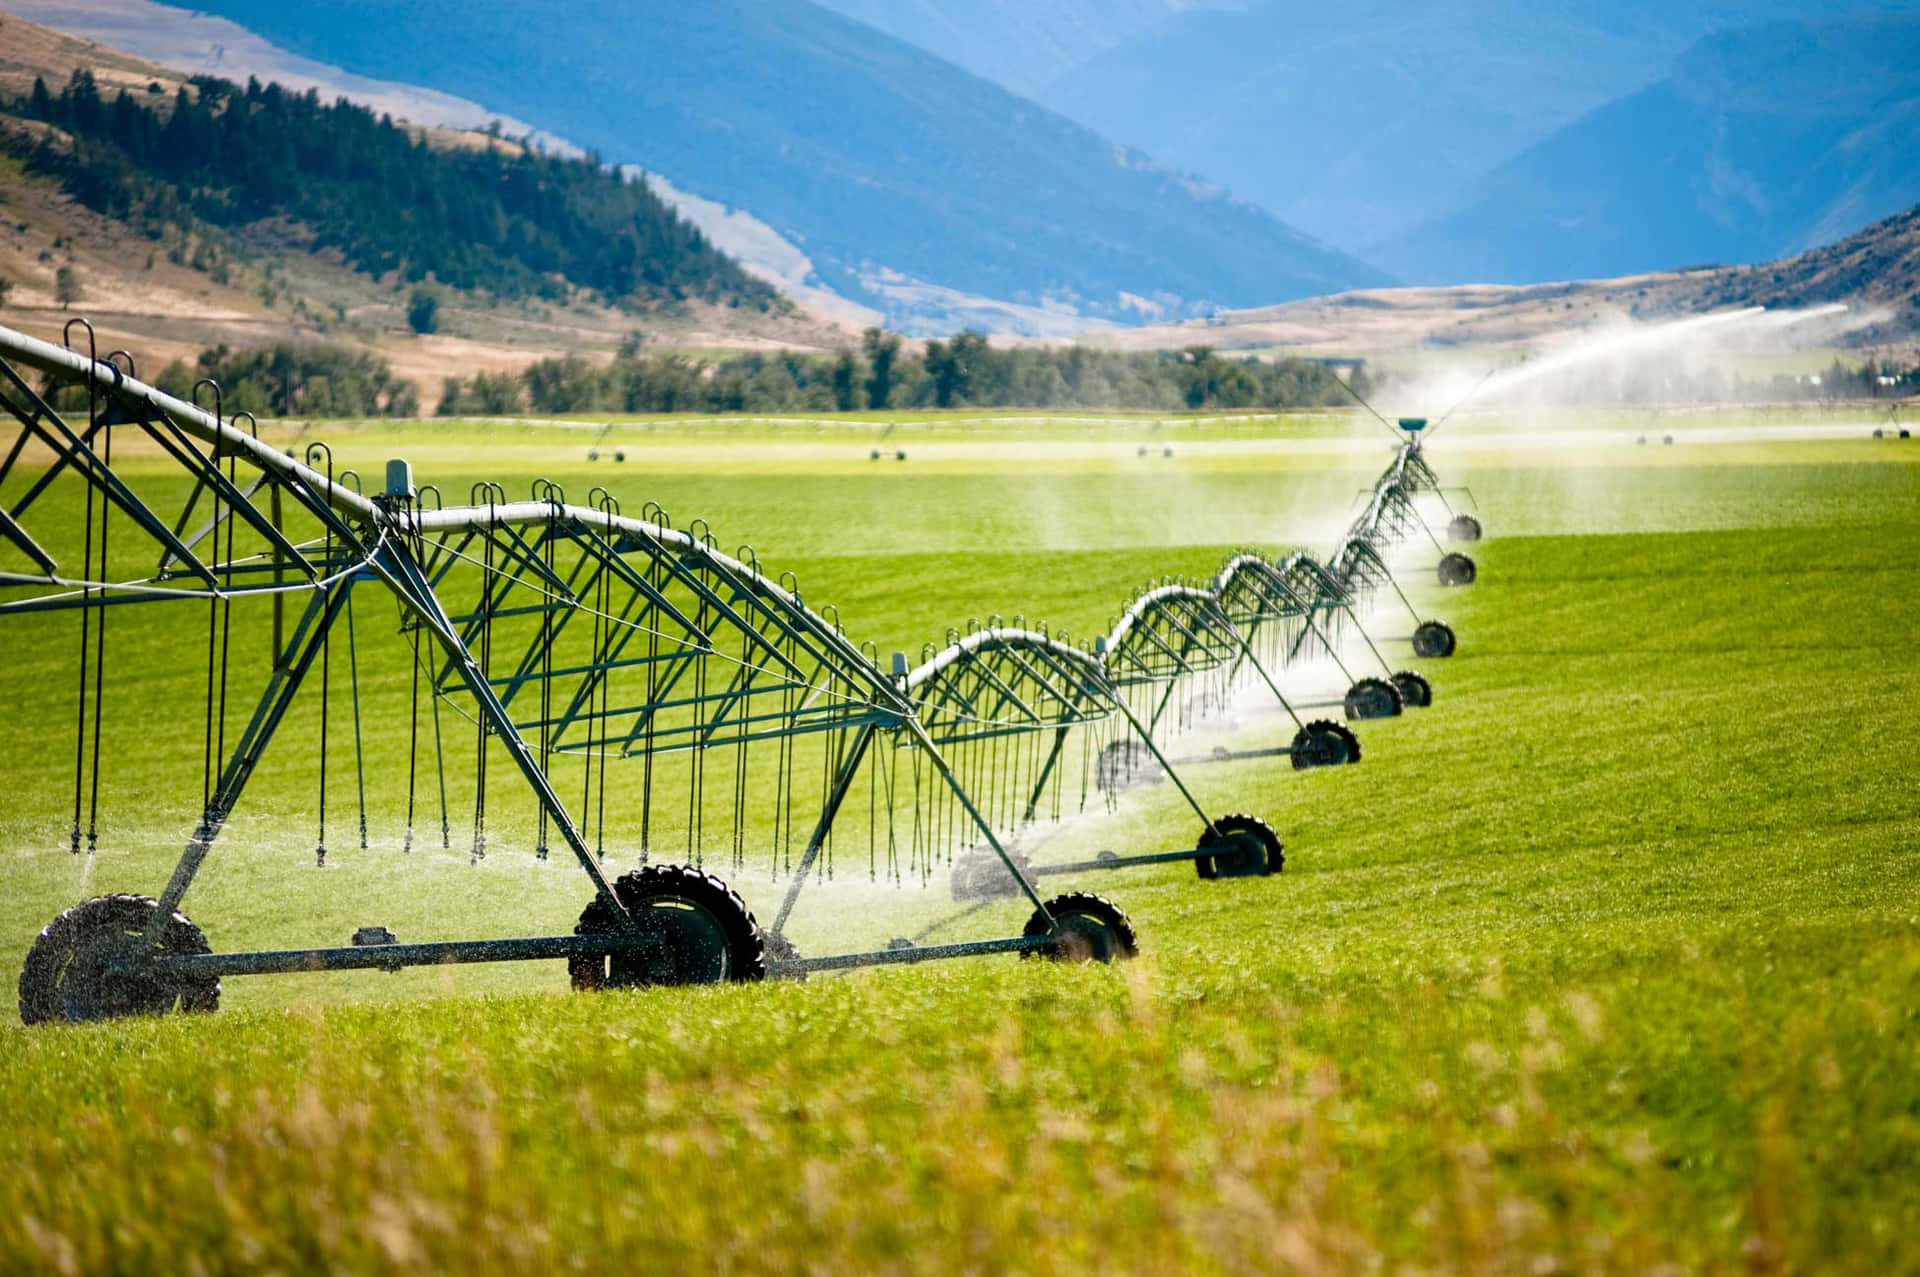 Irrigation Systems In A Field With Mountains In The Background